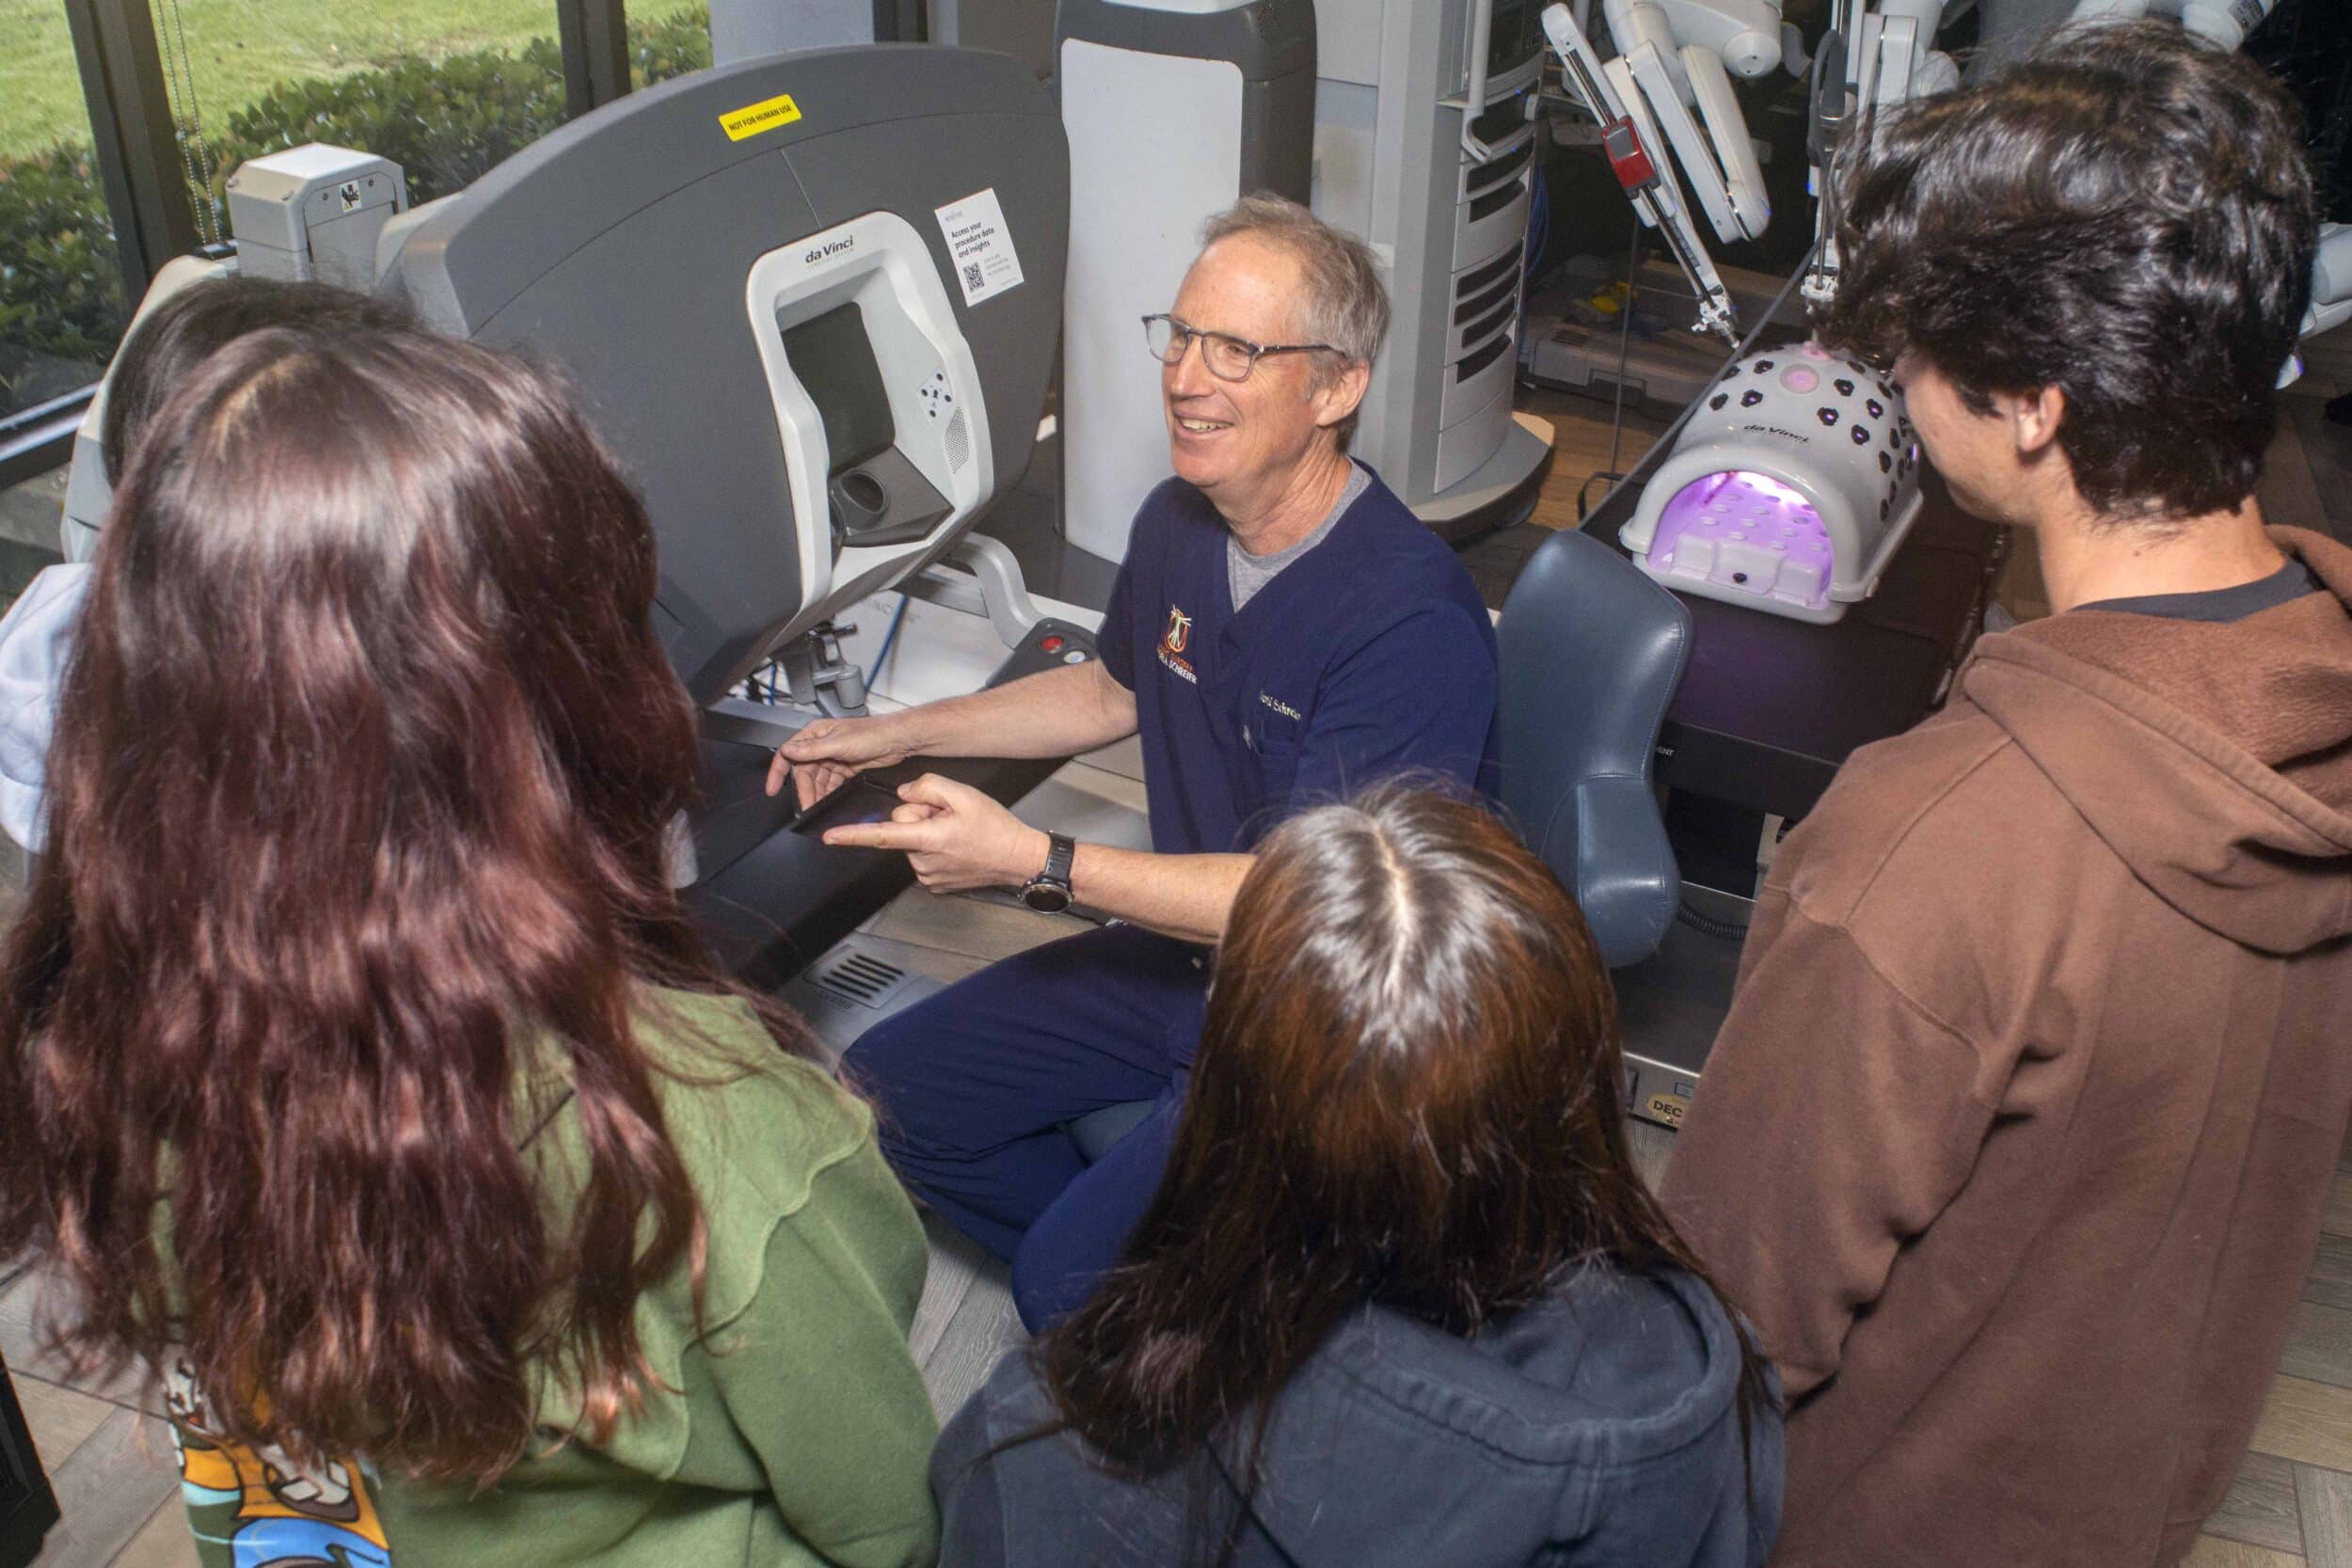 Surgeon console Dr. Schreier and students at West hills Hospital robotic surgery open house